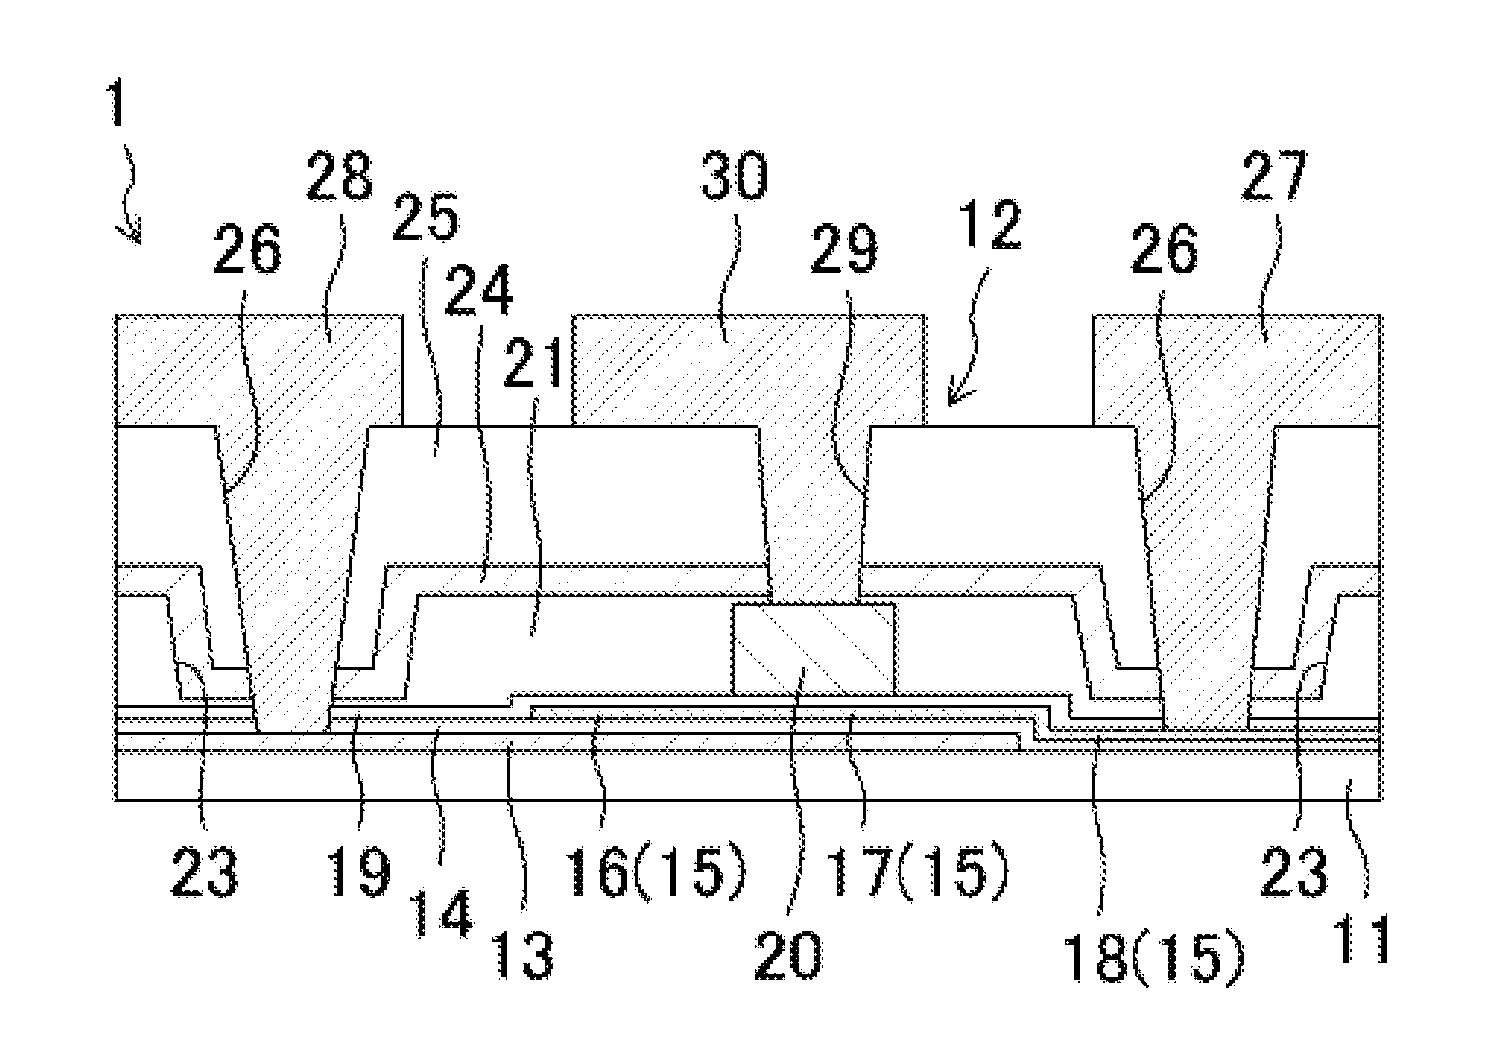 Semiconductor device and method of producing same